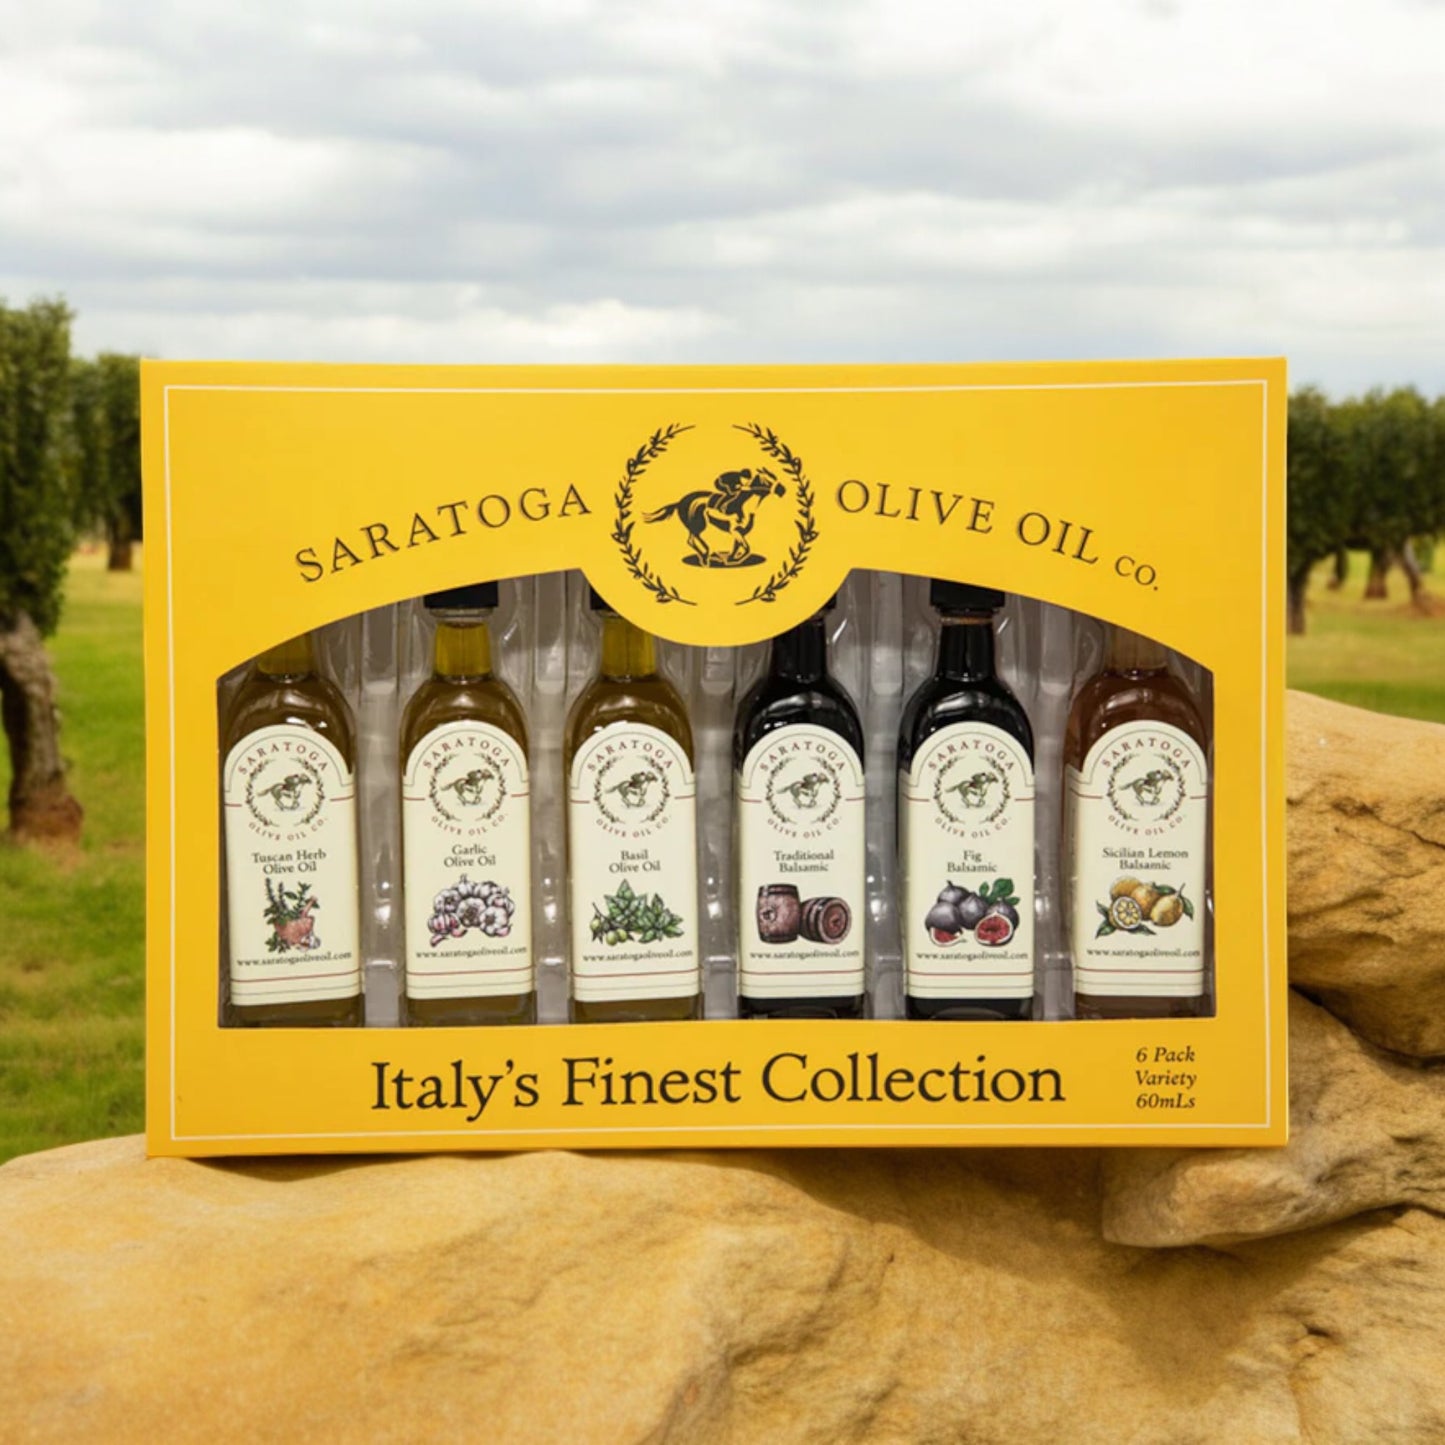 Saratoga Italy's Finest Collection Gift Set 60mL Six Pack Sampler